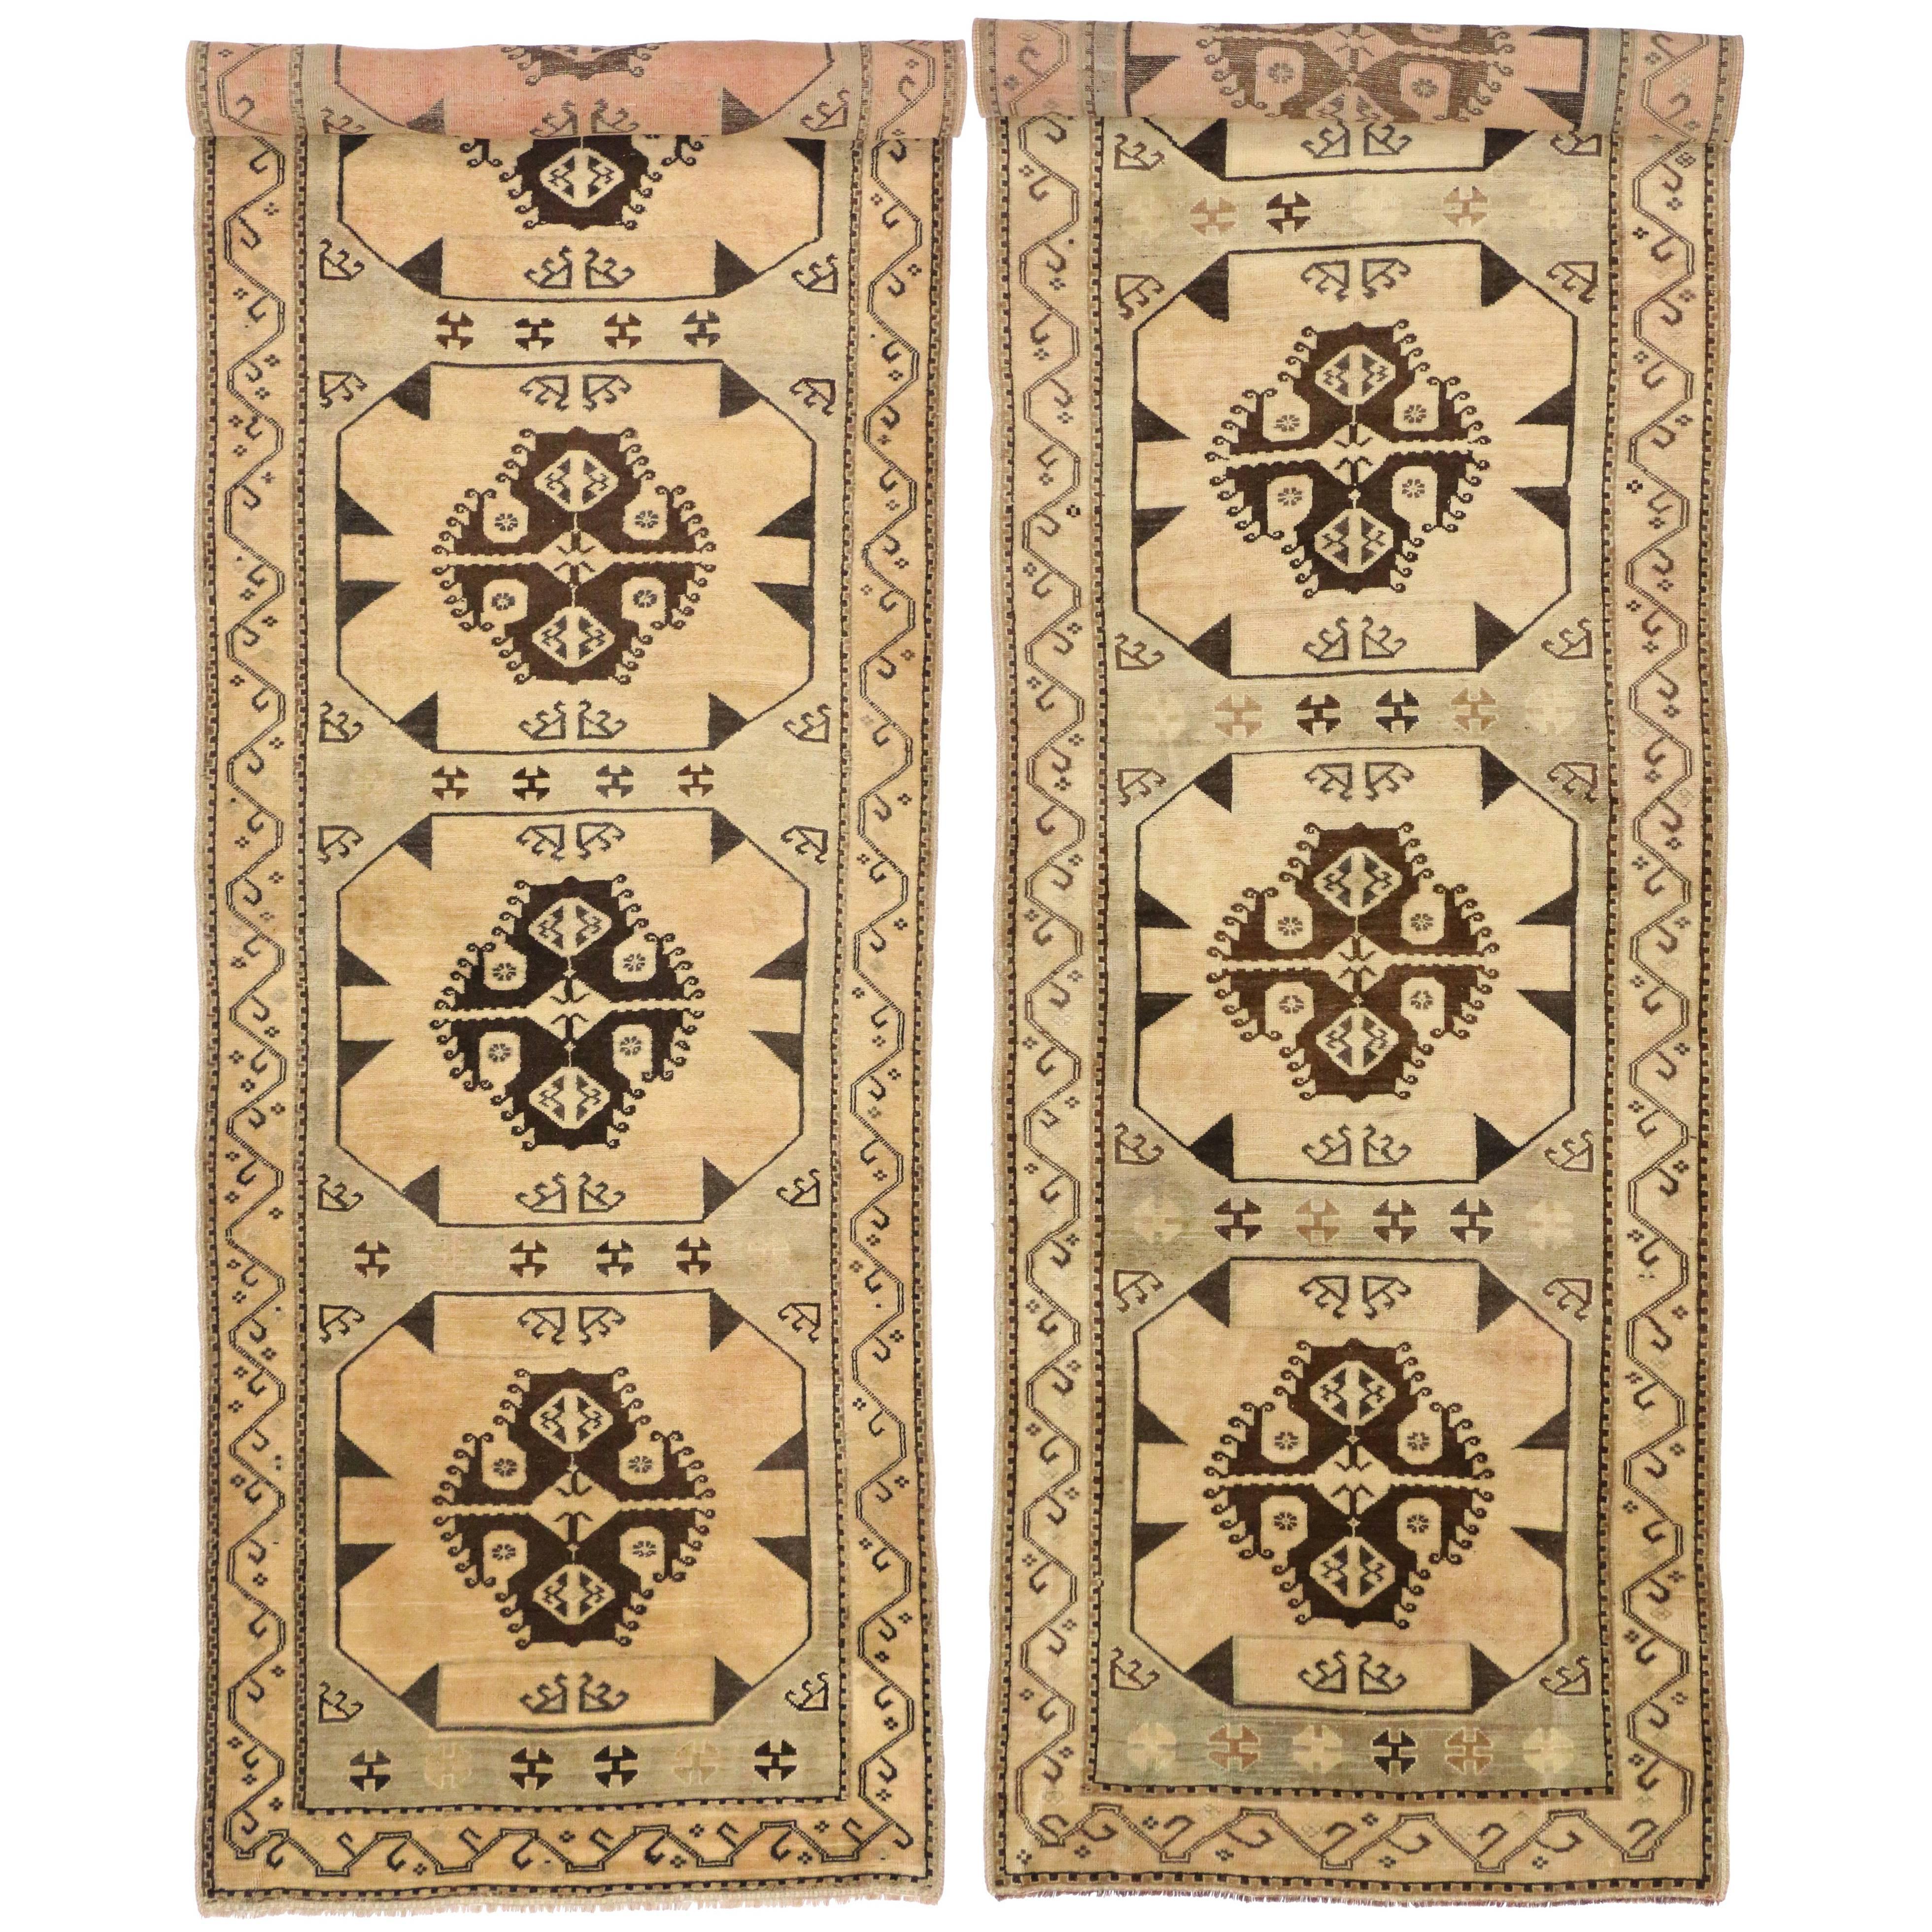 Pair of Vintage Turkish Oushak Carpet Runners with Modern Style and Muted Colors